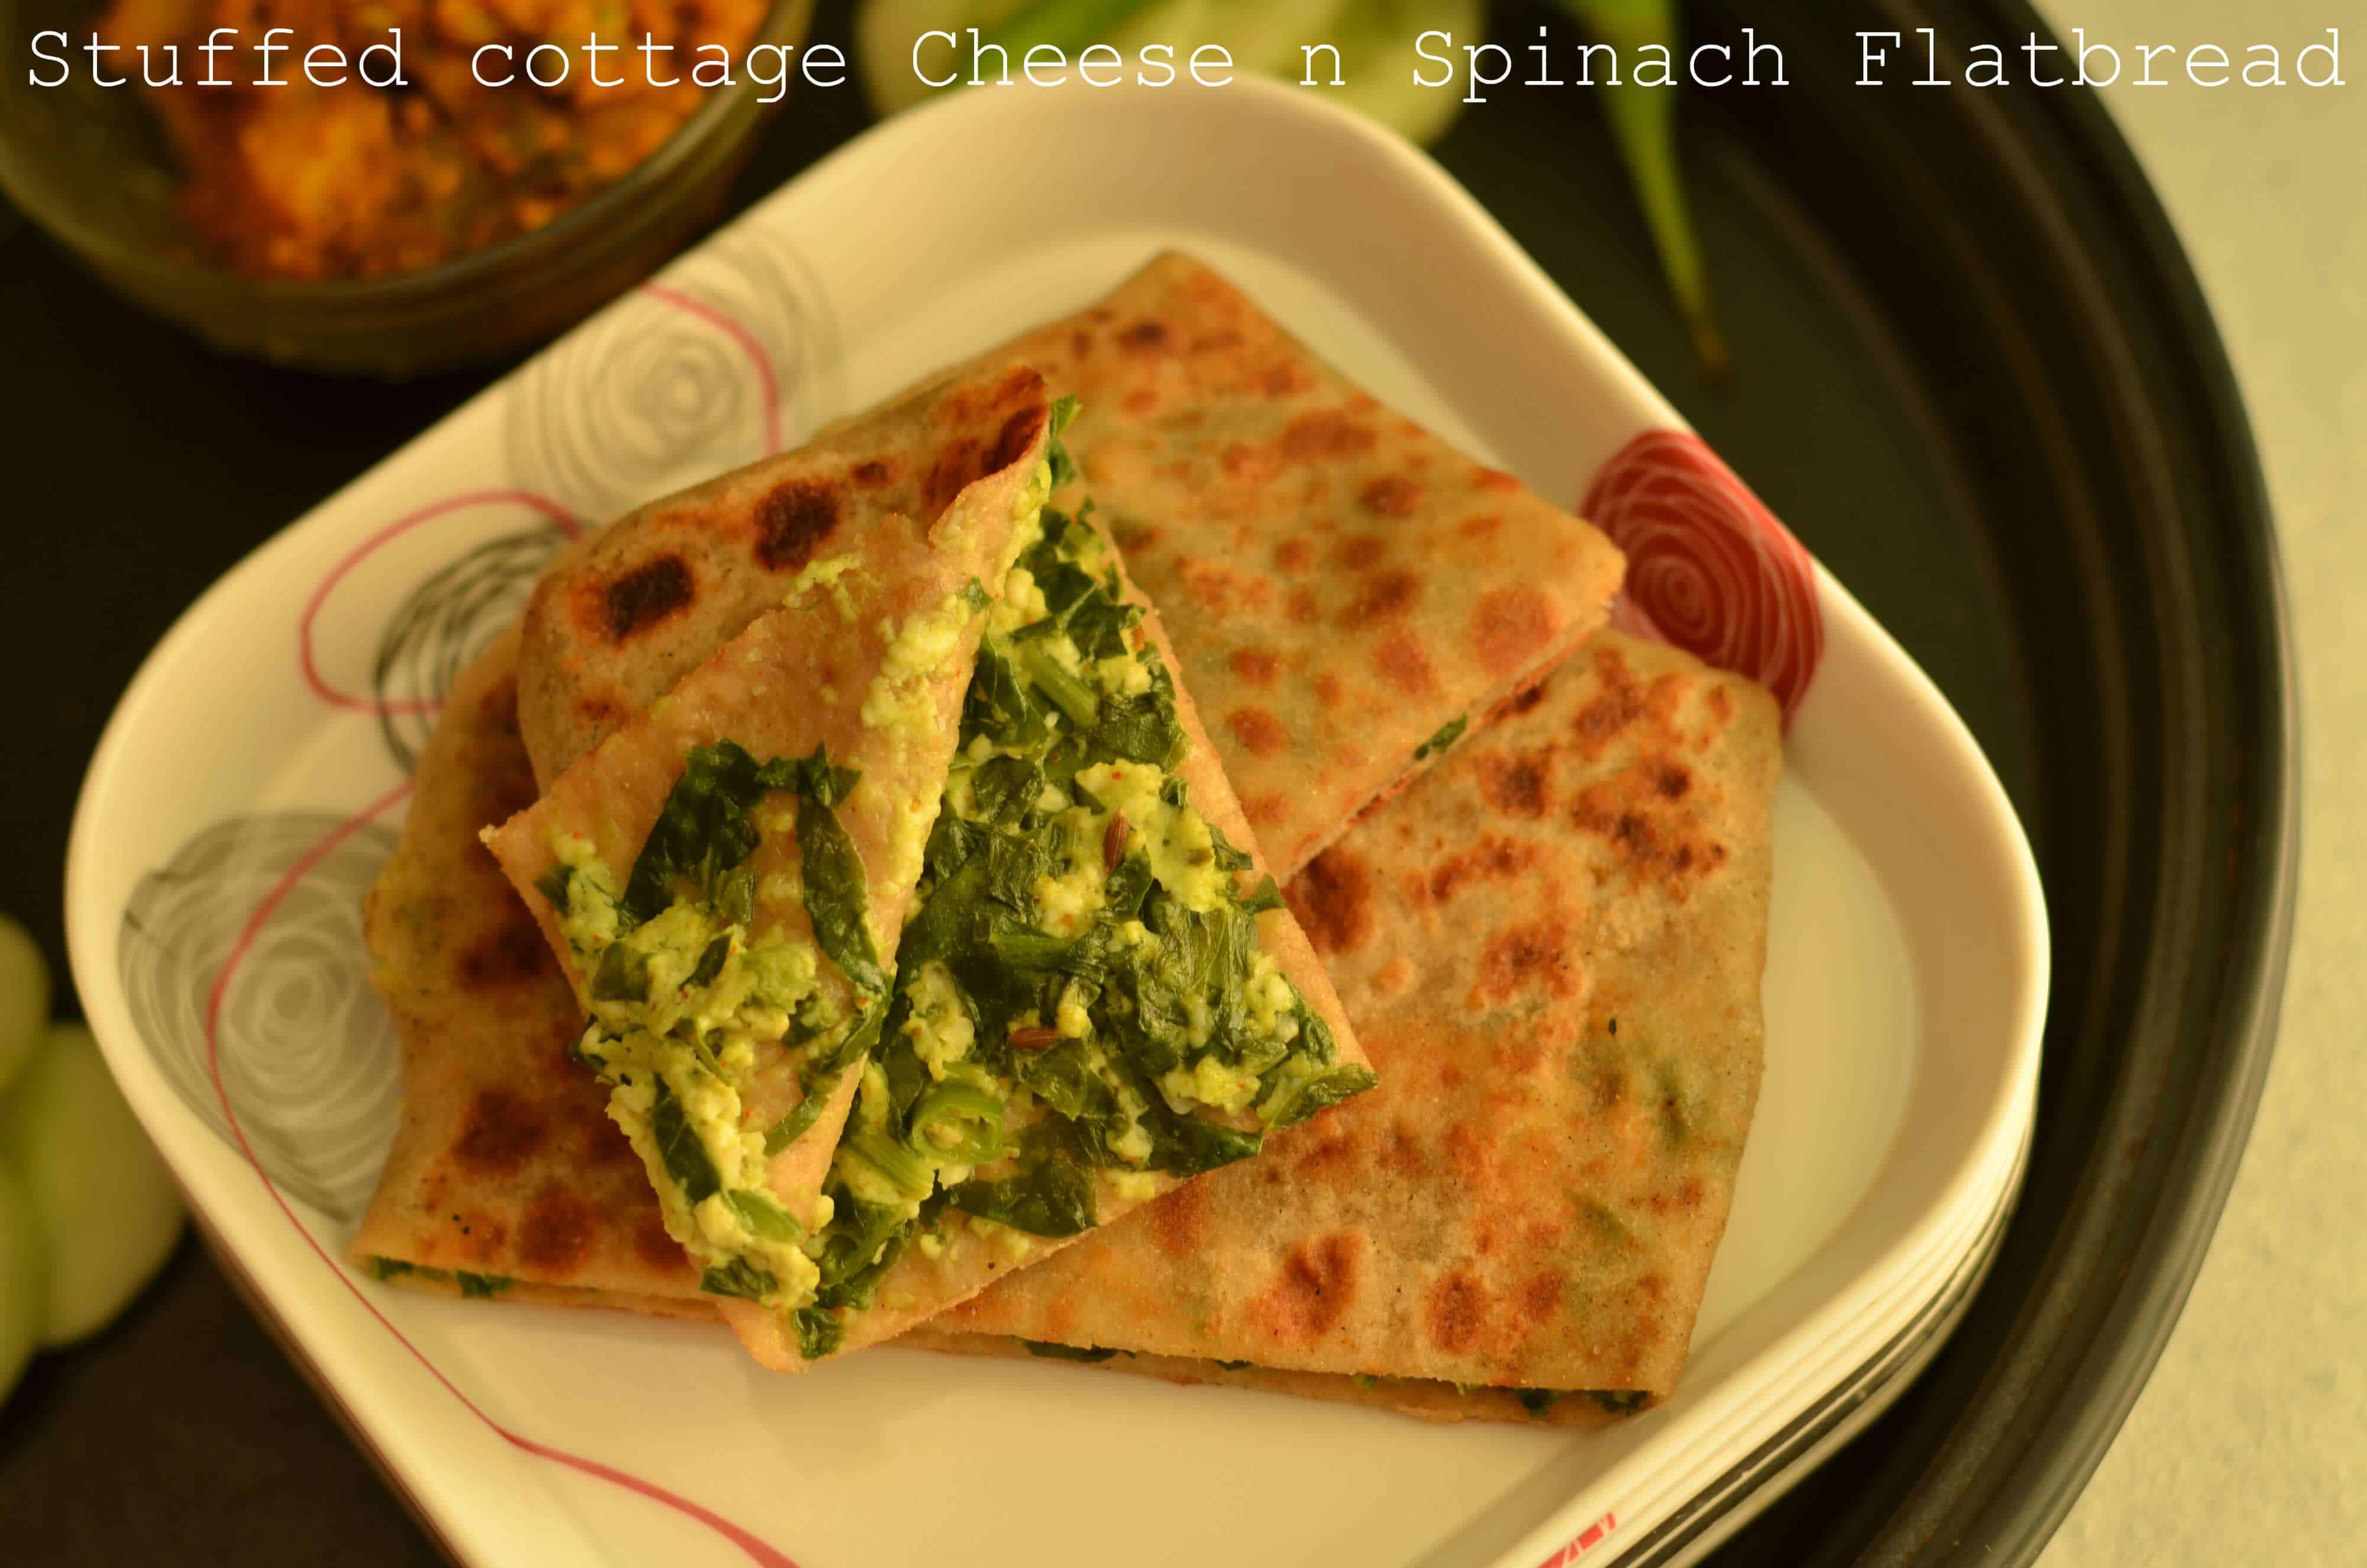 Lifafa paratha or Palak Paneer Lifafa Paratha is a paratha which is of envelope shape and stuffed with palak-paneer filling. Lifafa means envelop or pocket. Filling seasoned with spices, stuffed in the roti(flatbread), sealed like an envelope before cooking on stove top. Basically, a roti folded into a lifafa or pocket shape with filling inside.